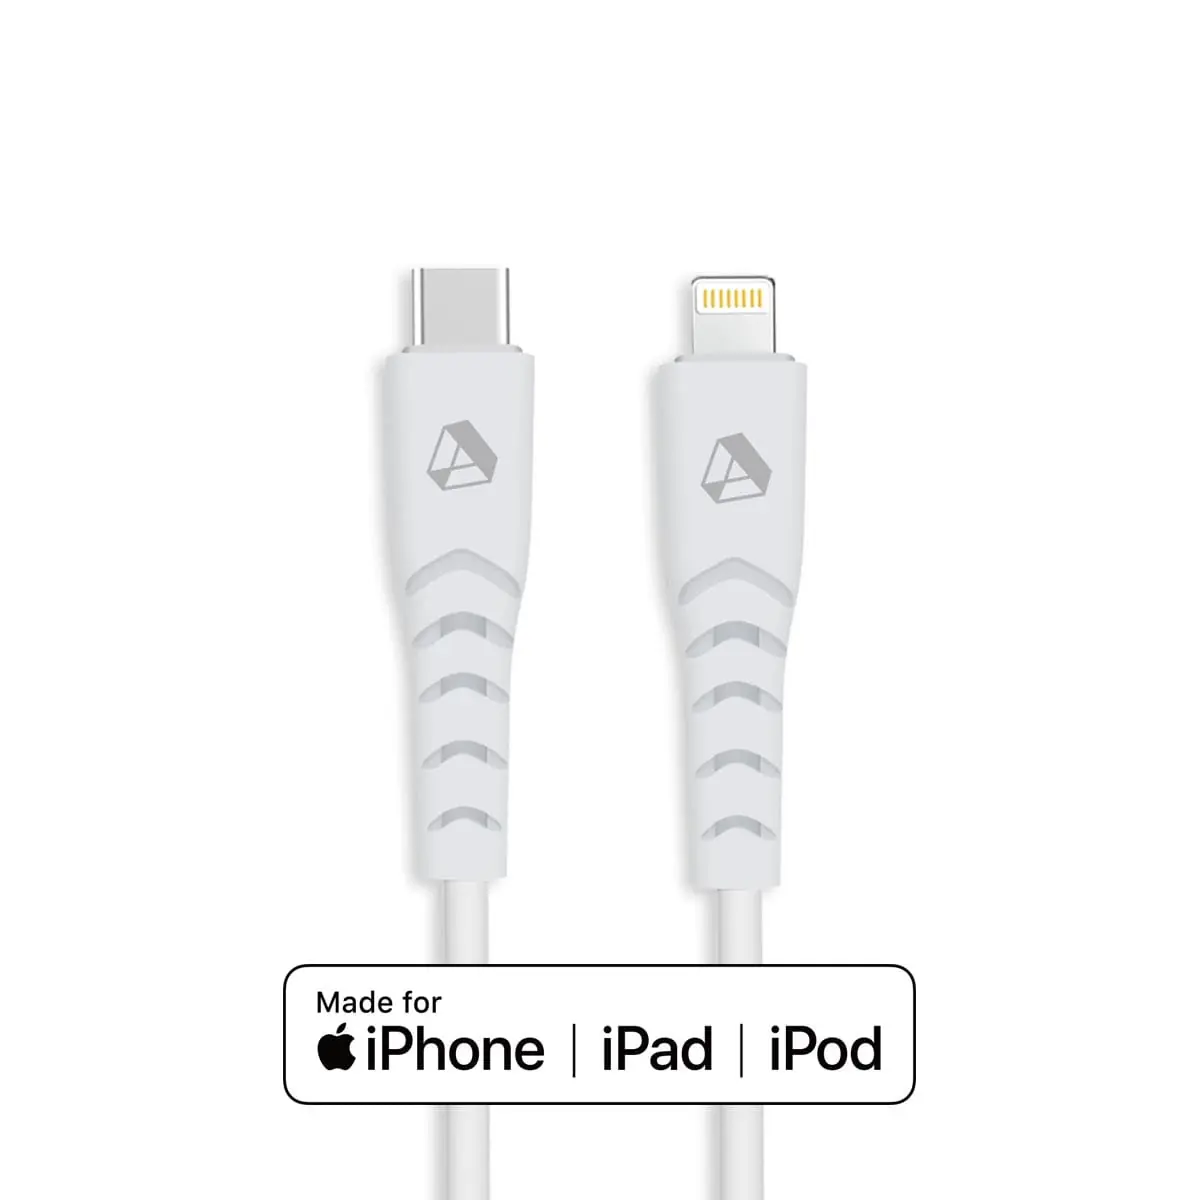 How the Adreama Eco-friendly Lightning to USB-C Cable Helps Reduce Environmental Impact